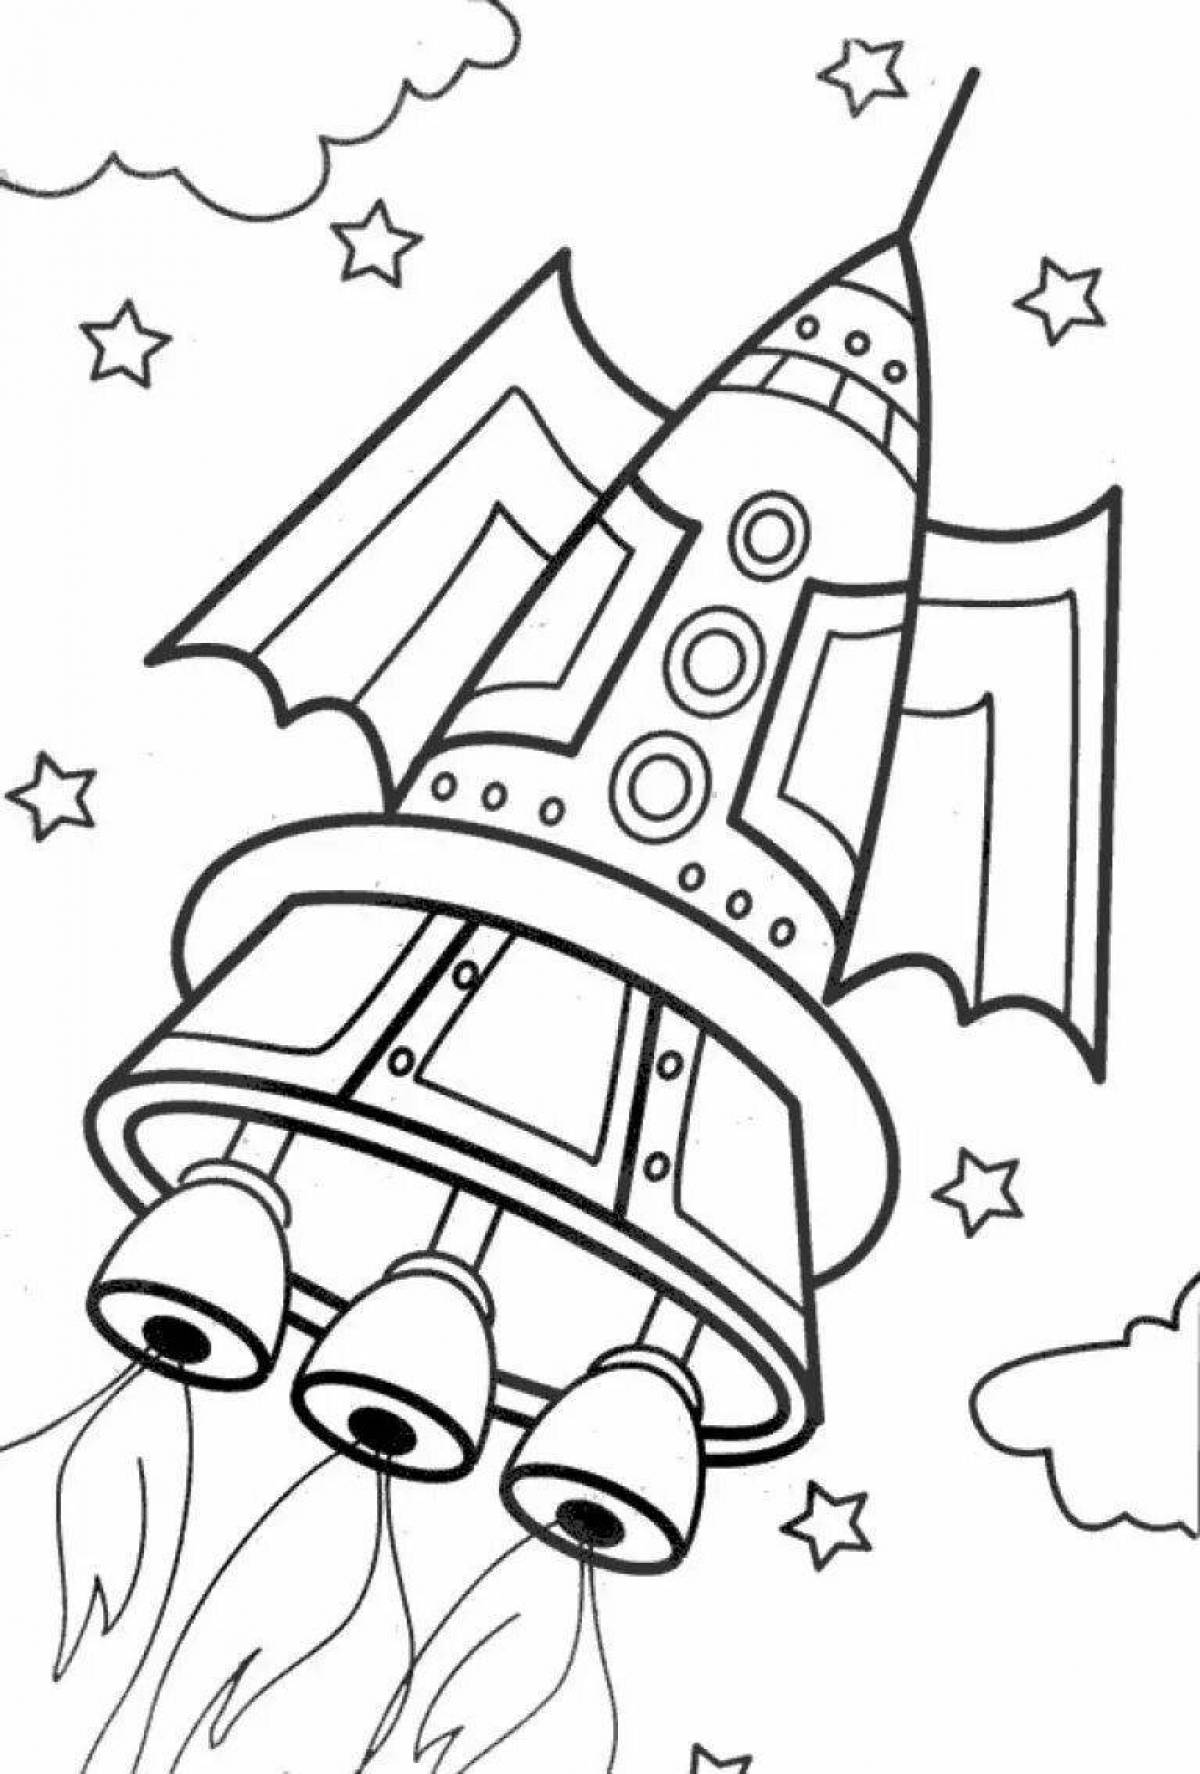 Intriguing rocket coloring book for 5-6 year olds